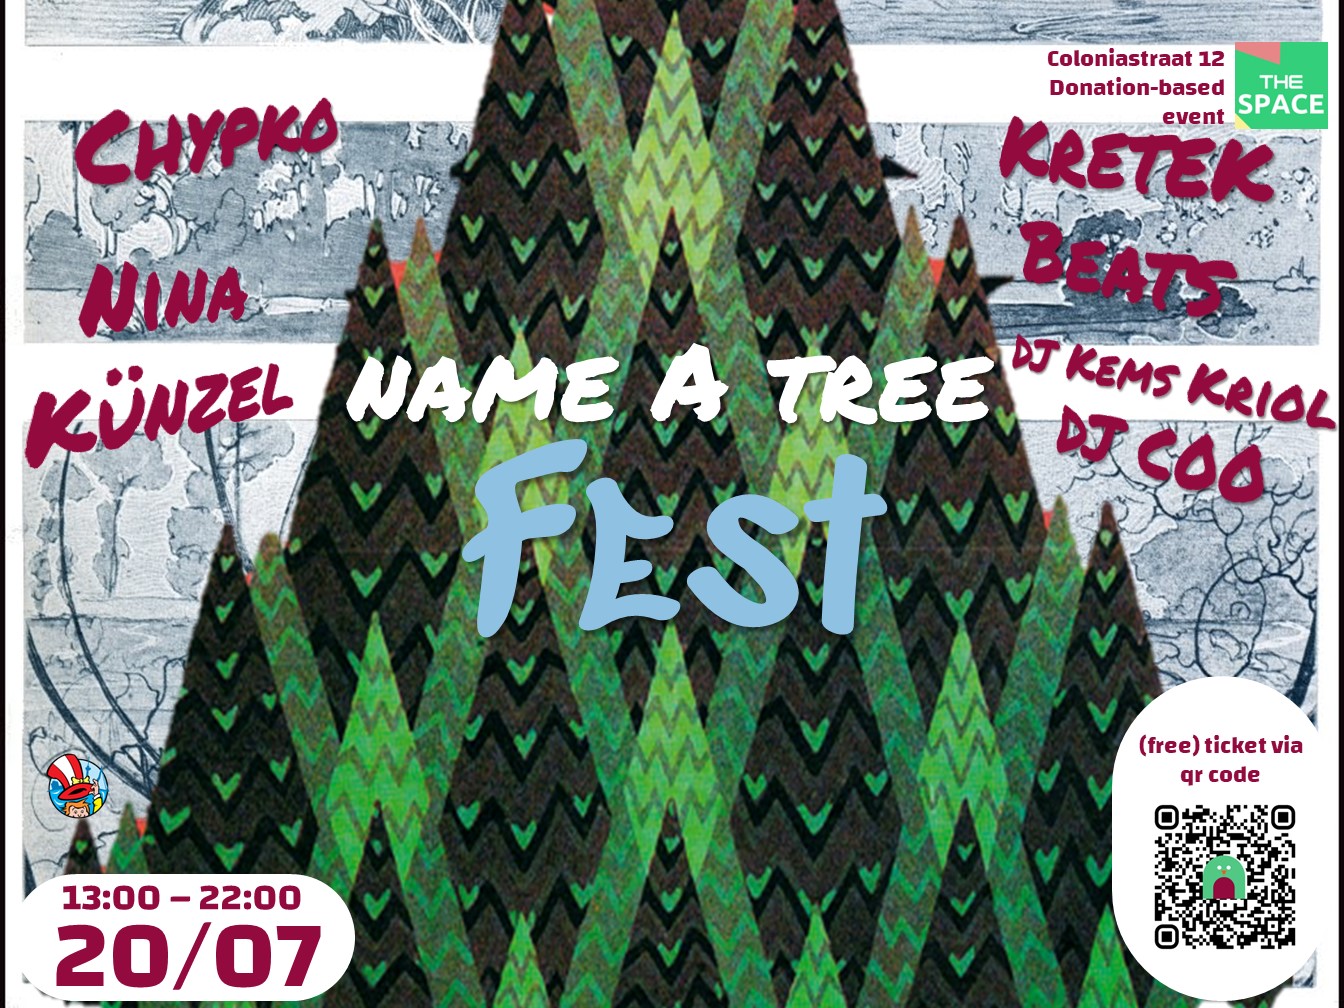 Name A Tree Fest Poster